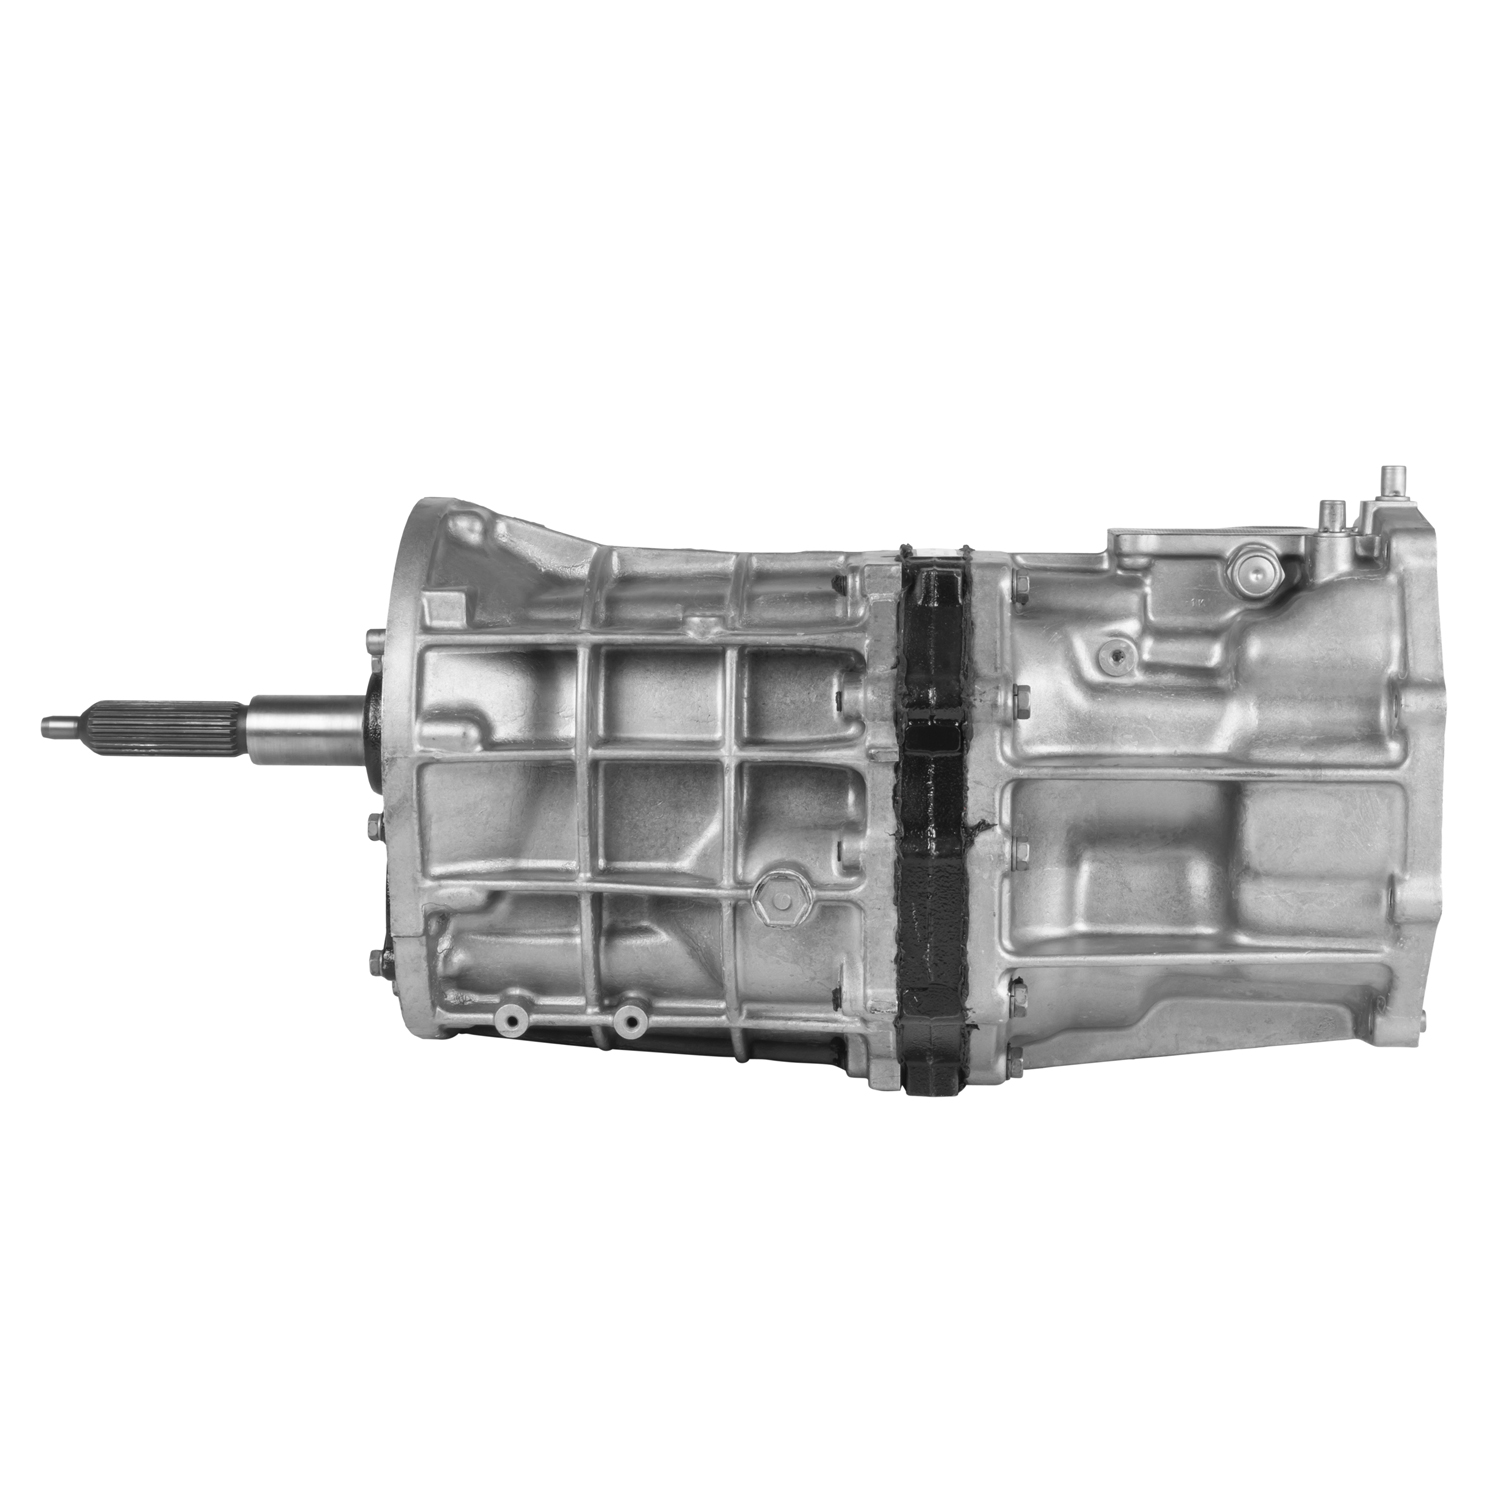 Manual Transmission for Toyota T100, 5 Speed, 4 Wheel Drive